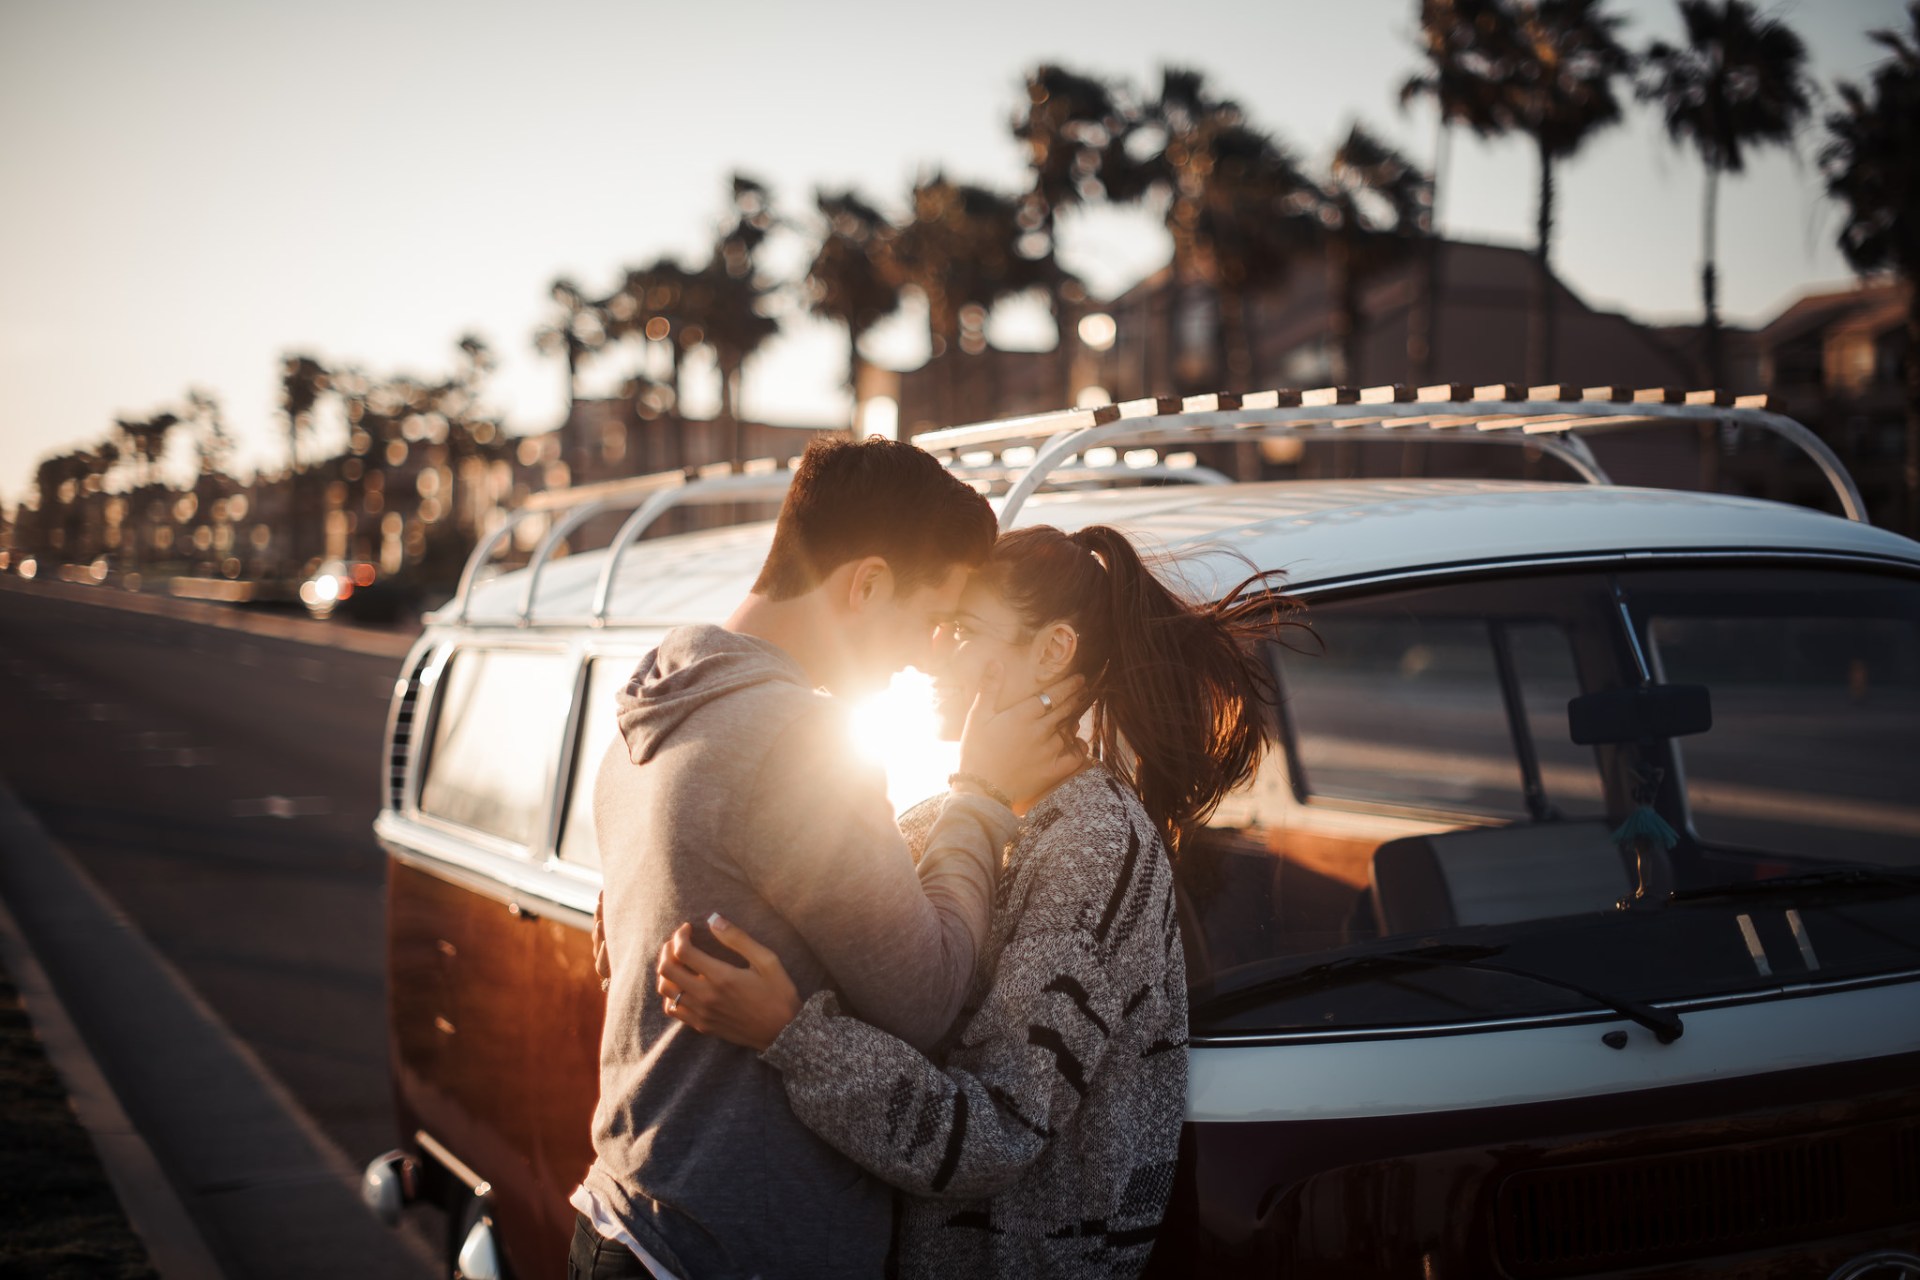 This Is How You Change When You're In Love, Based On Your Zodiac Sign